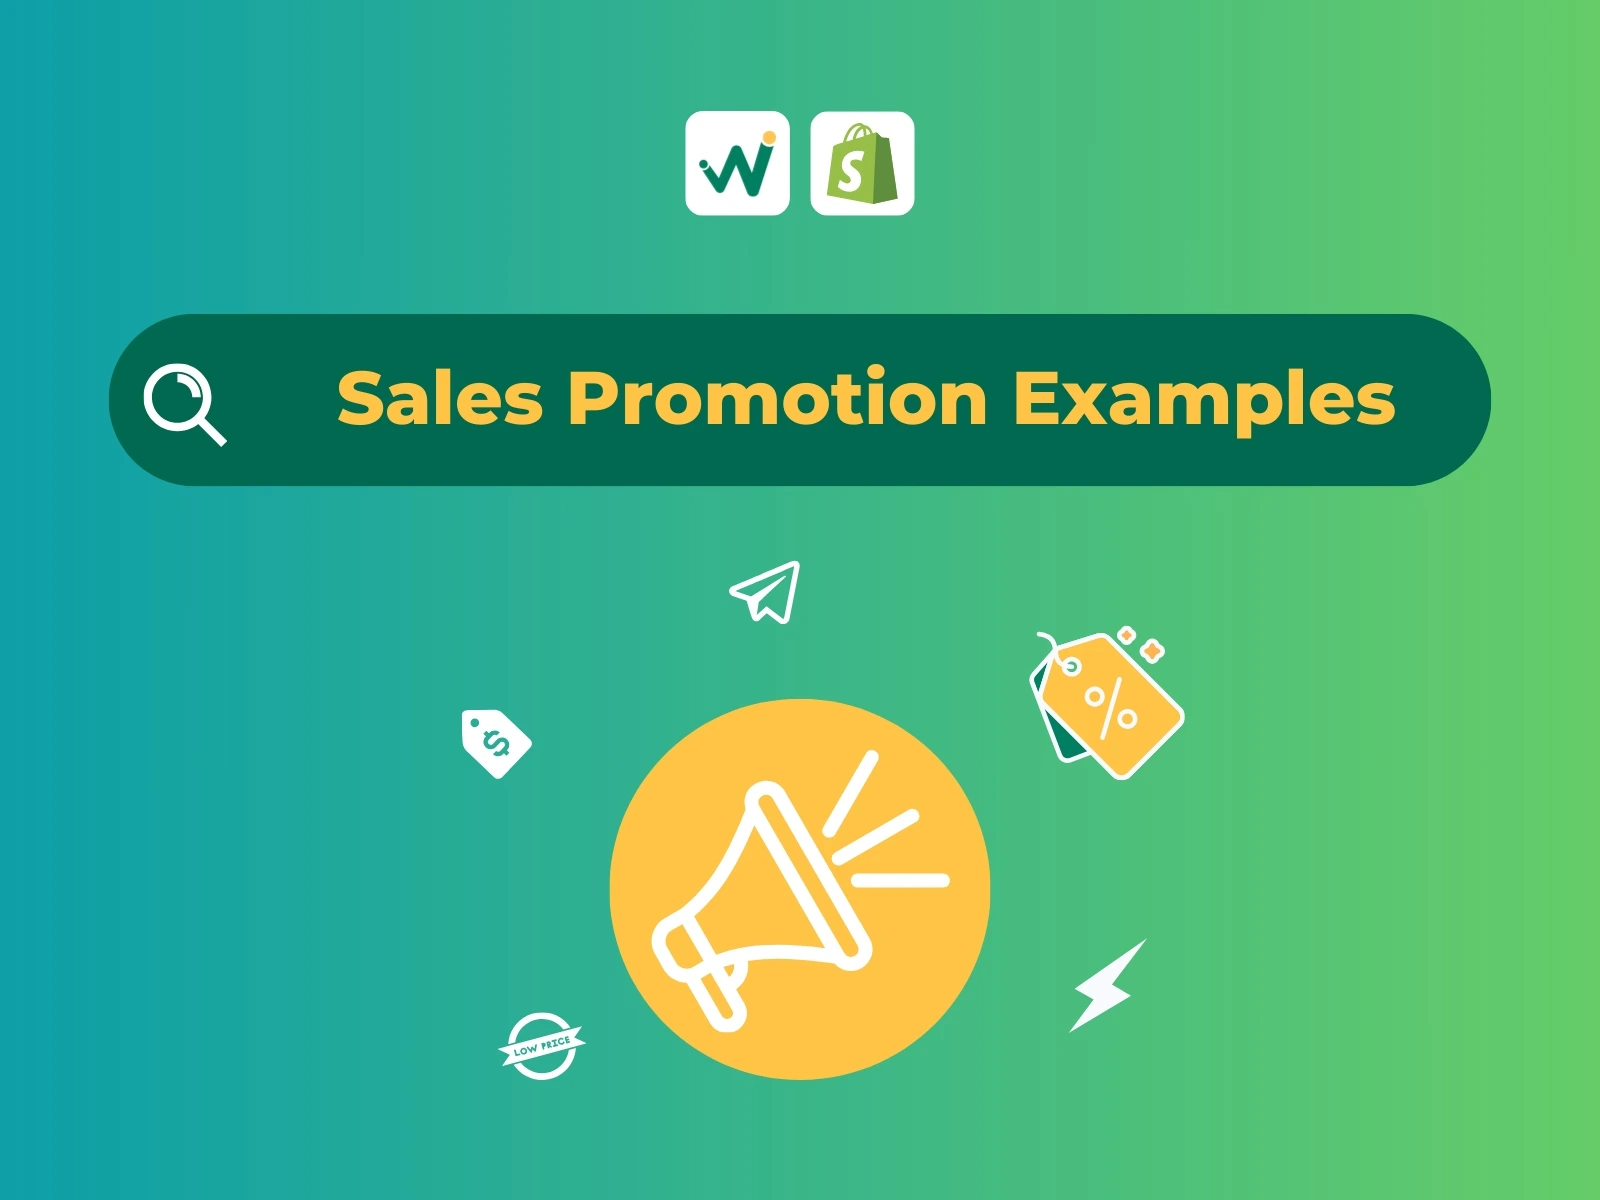 Sales promotion examples for Shopify stores